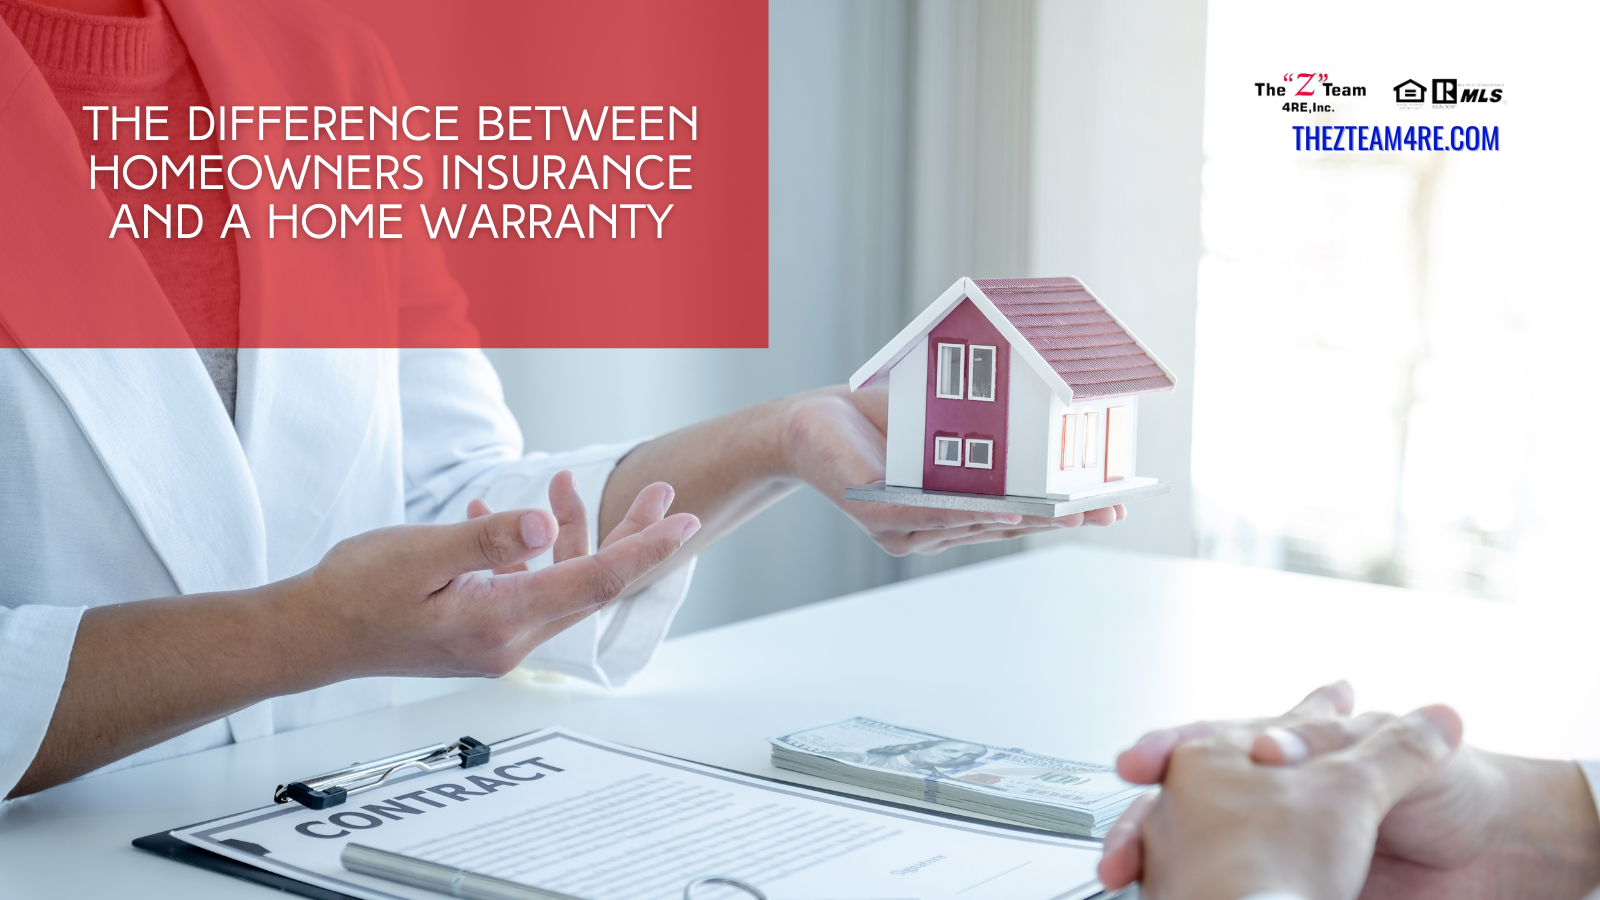 homeowners_insurance_v_home_warranty_lg.png